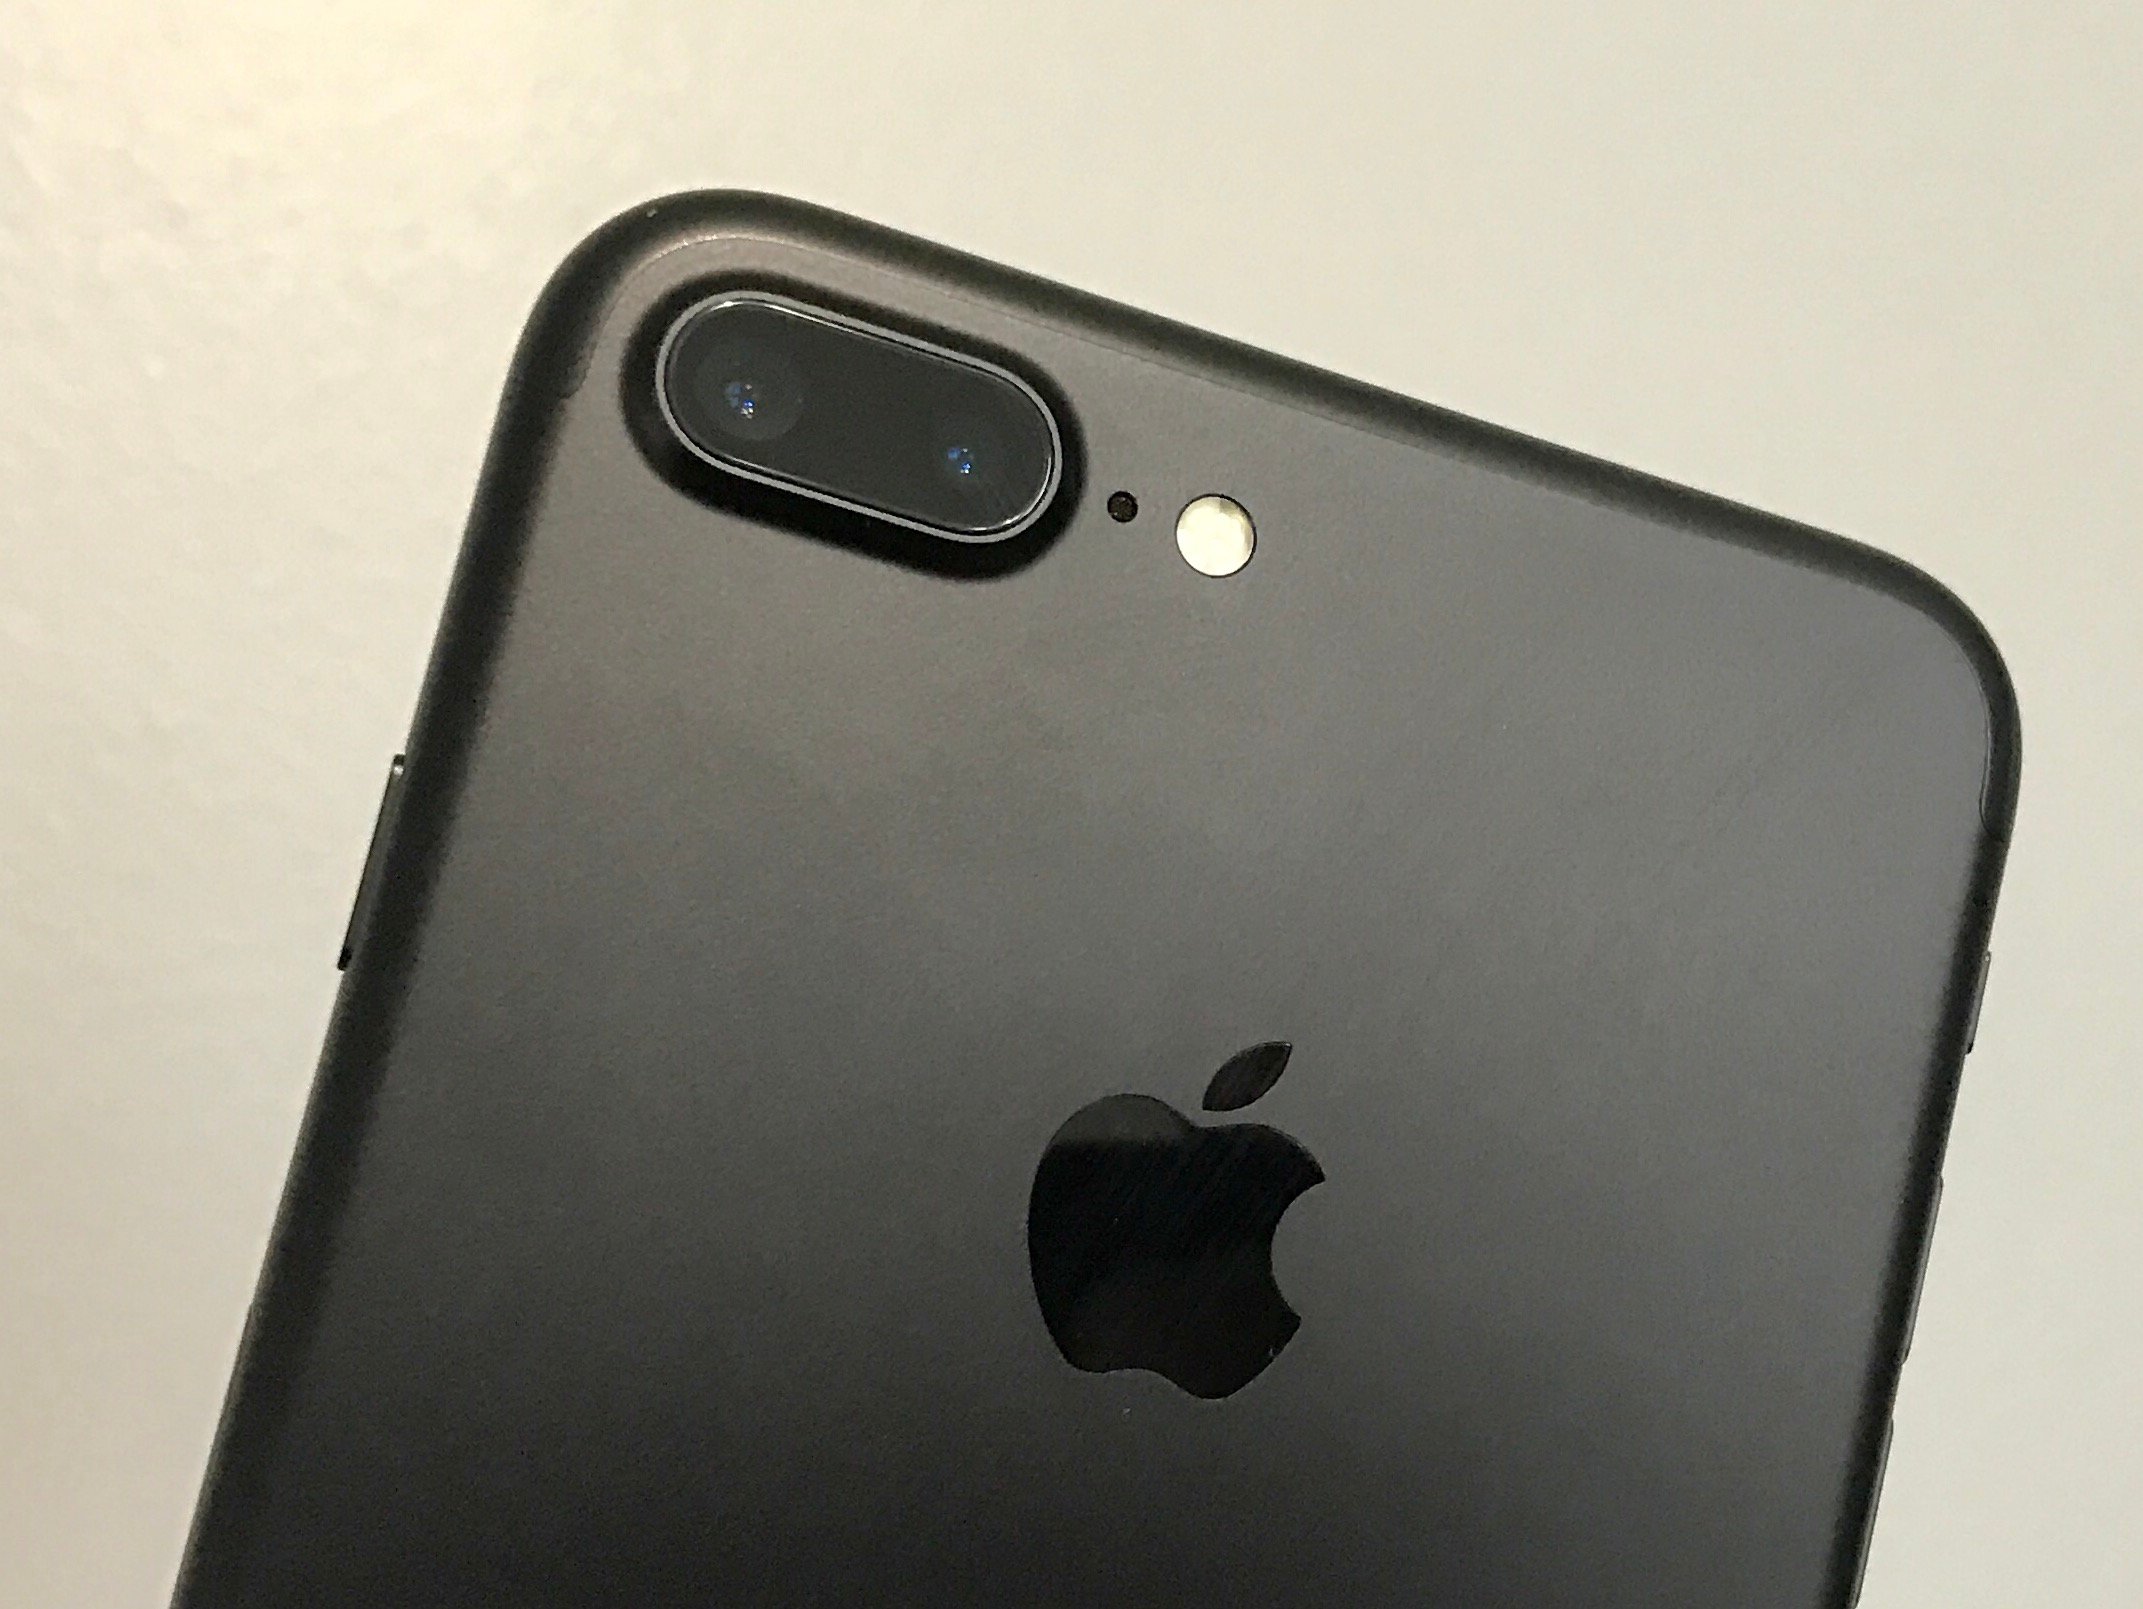 The iPhone 7 Plus zoom uses the two cameras on the back of the new iPhone.